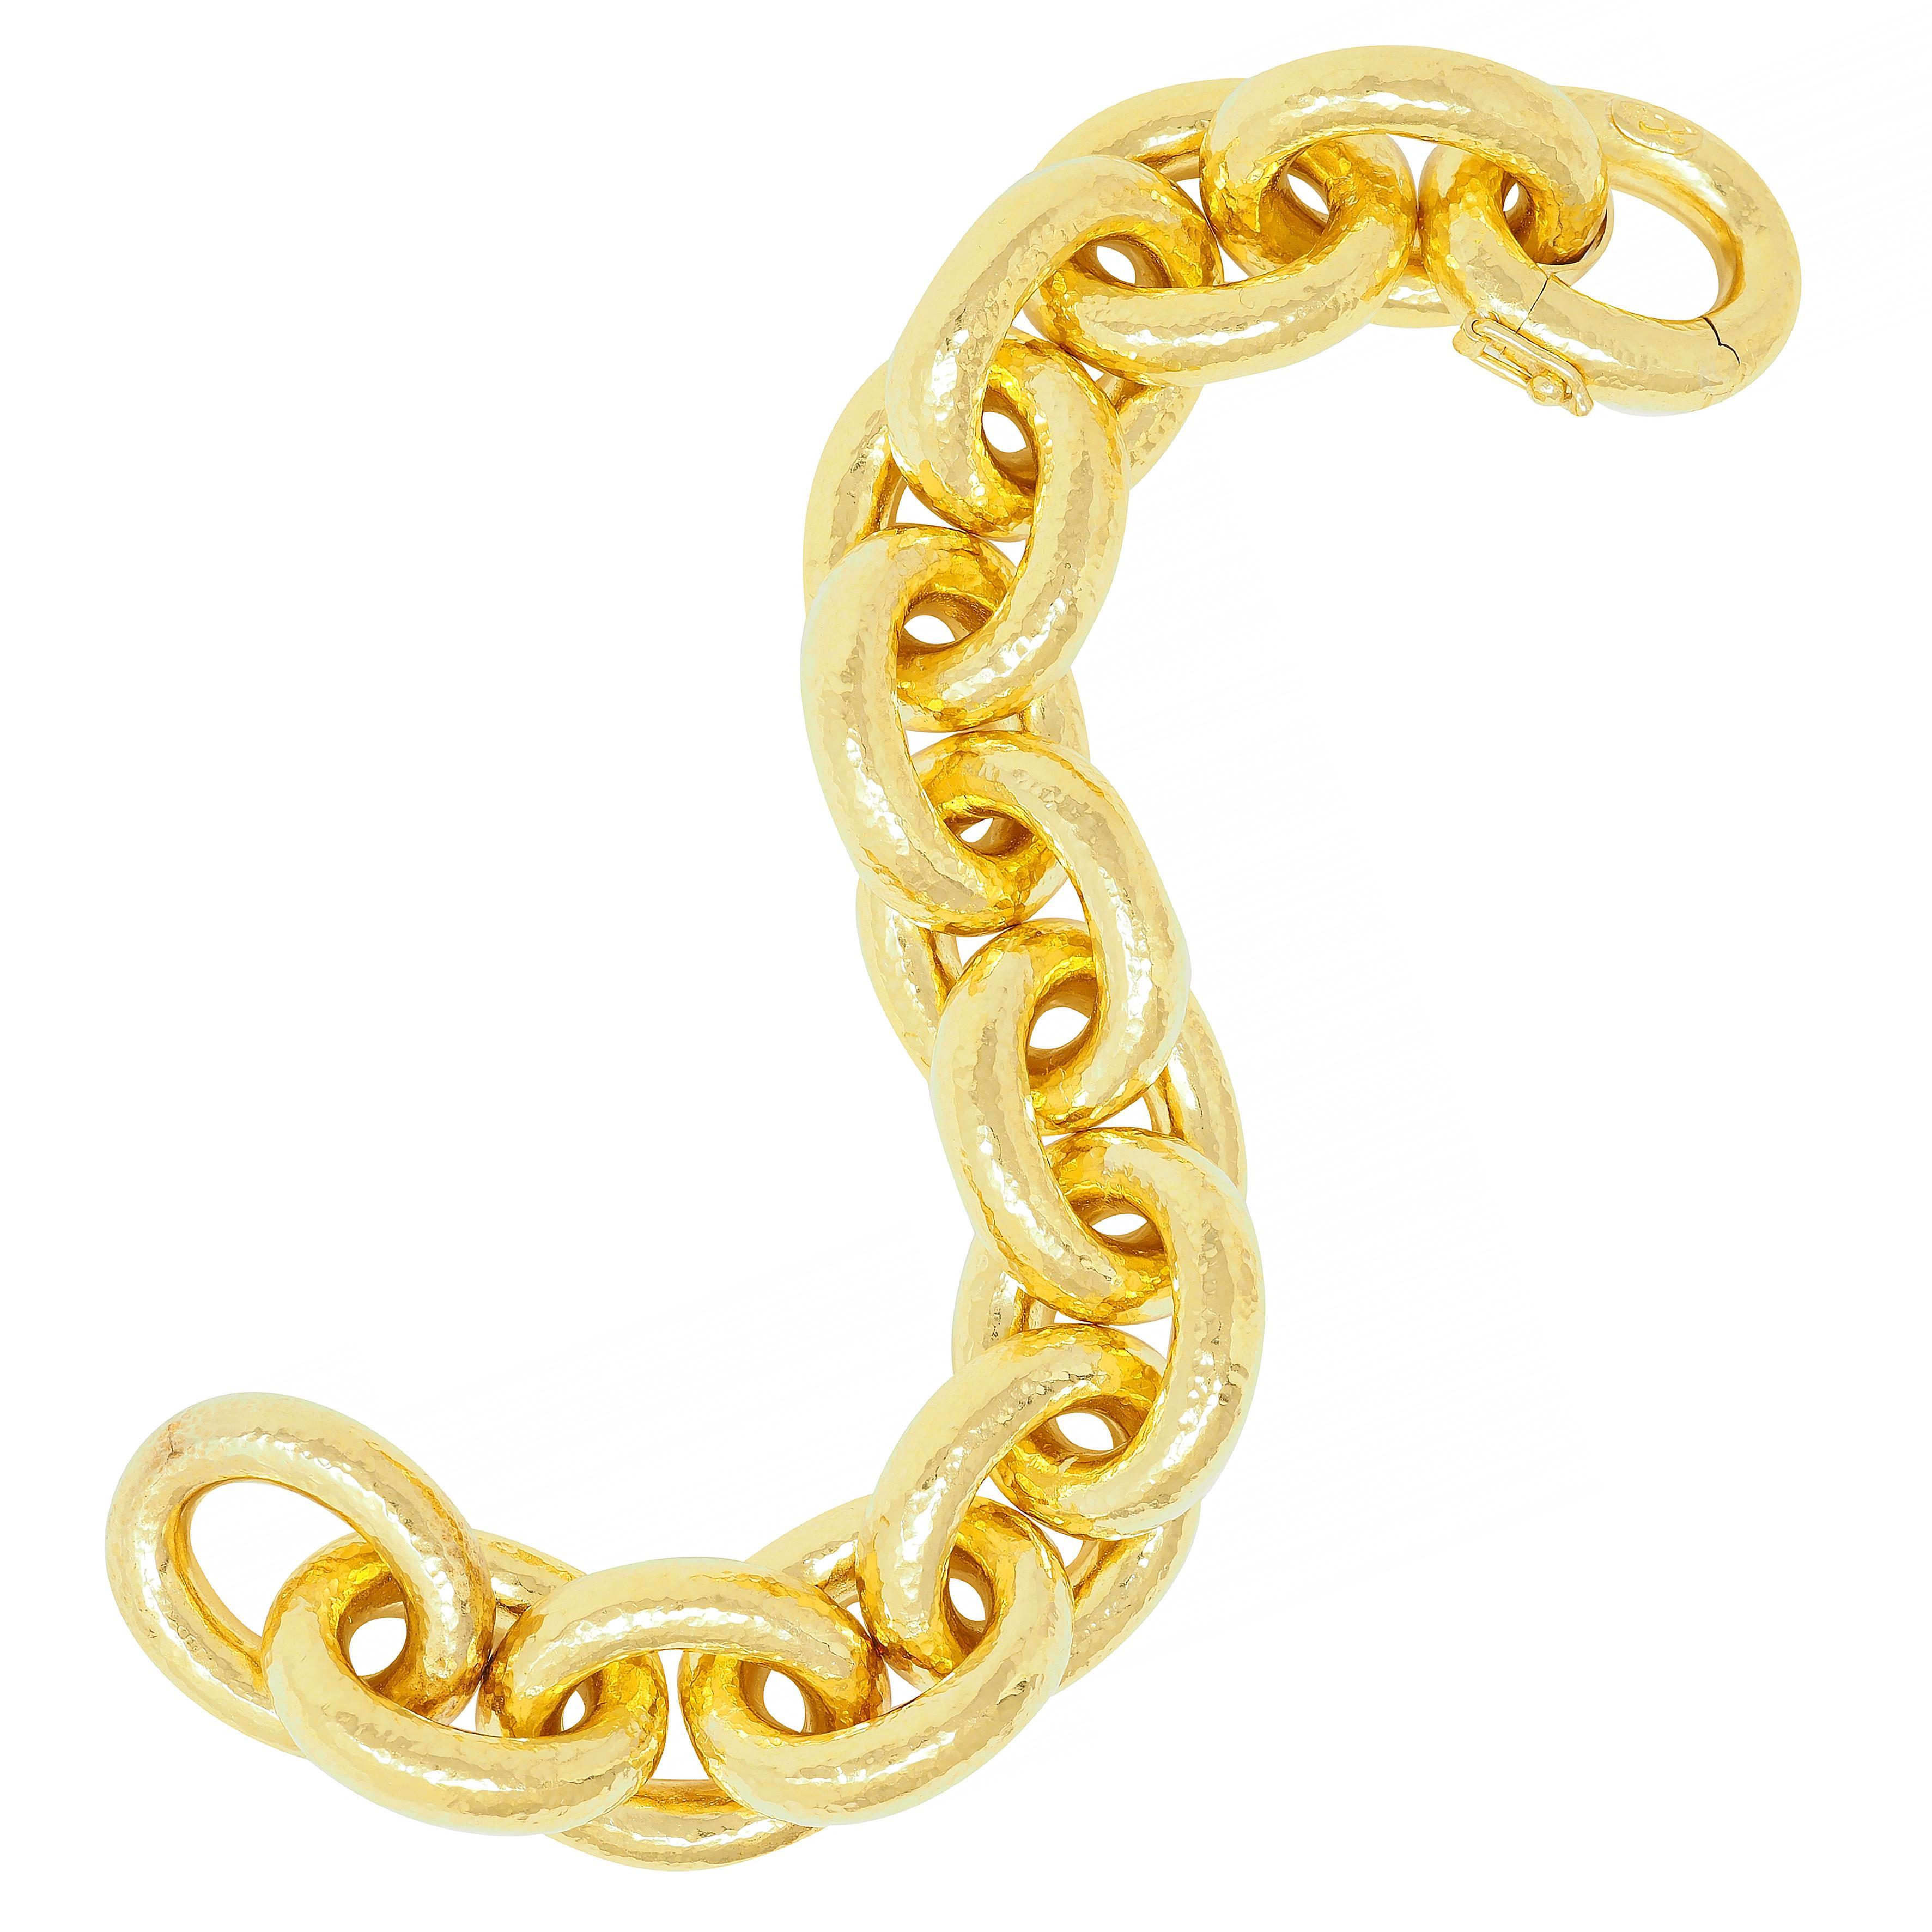 Designed as a large cable link bracelet 
With fine hammered texture throughout
Completed by concealed clasp closure
With figure eight safety
Stamped for 19 karat gold
With maker's mark for Elizabeth Locke
Circa: Late 20th Century 
Width at widest: